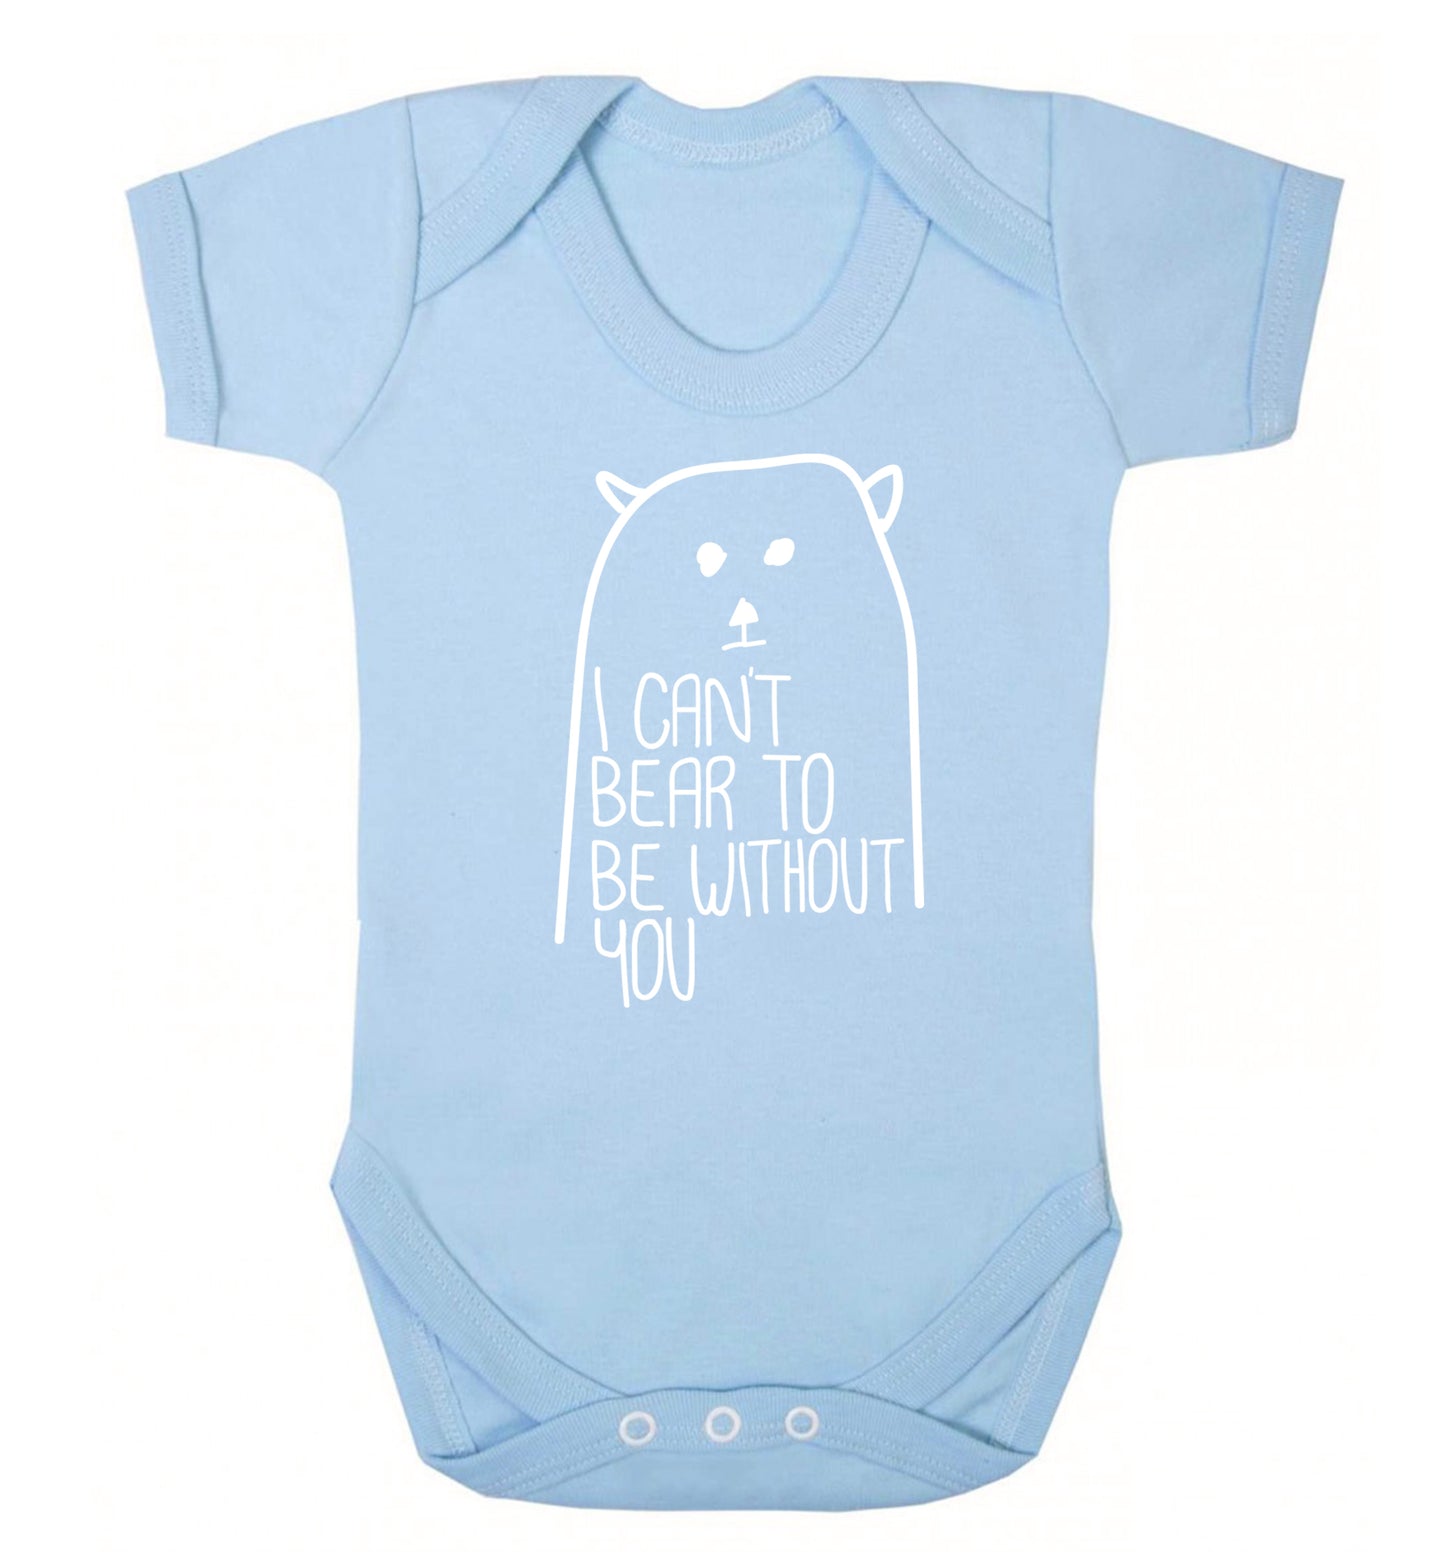 I can't bear to be without you Baby Vest pale blue 18-24 months